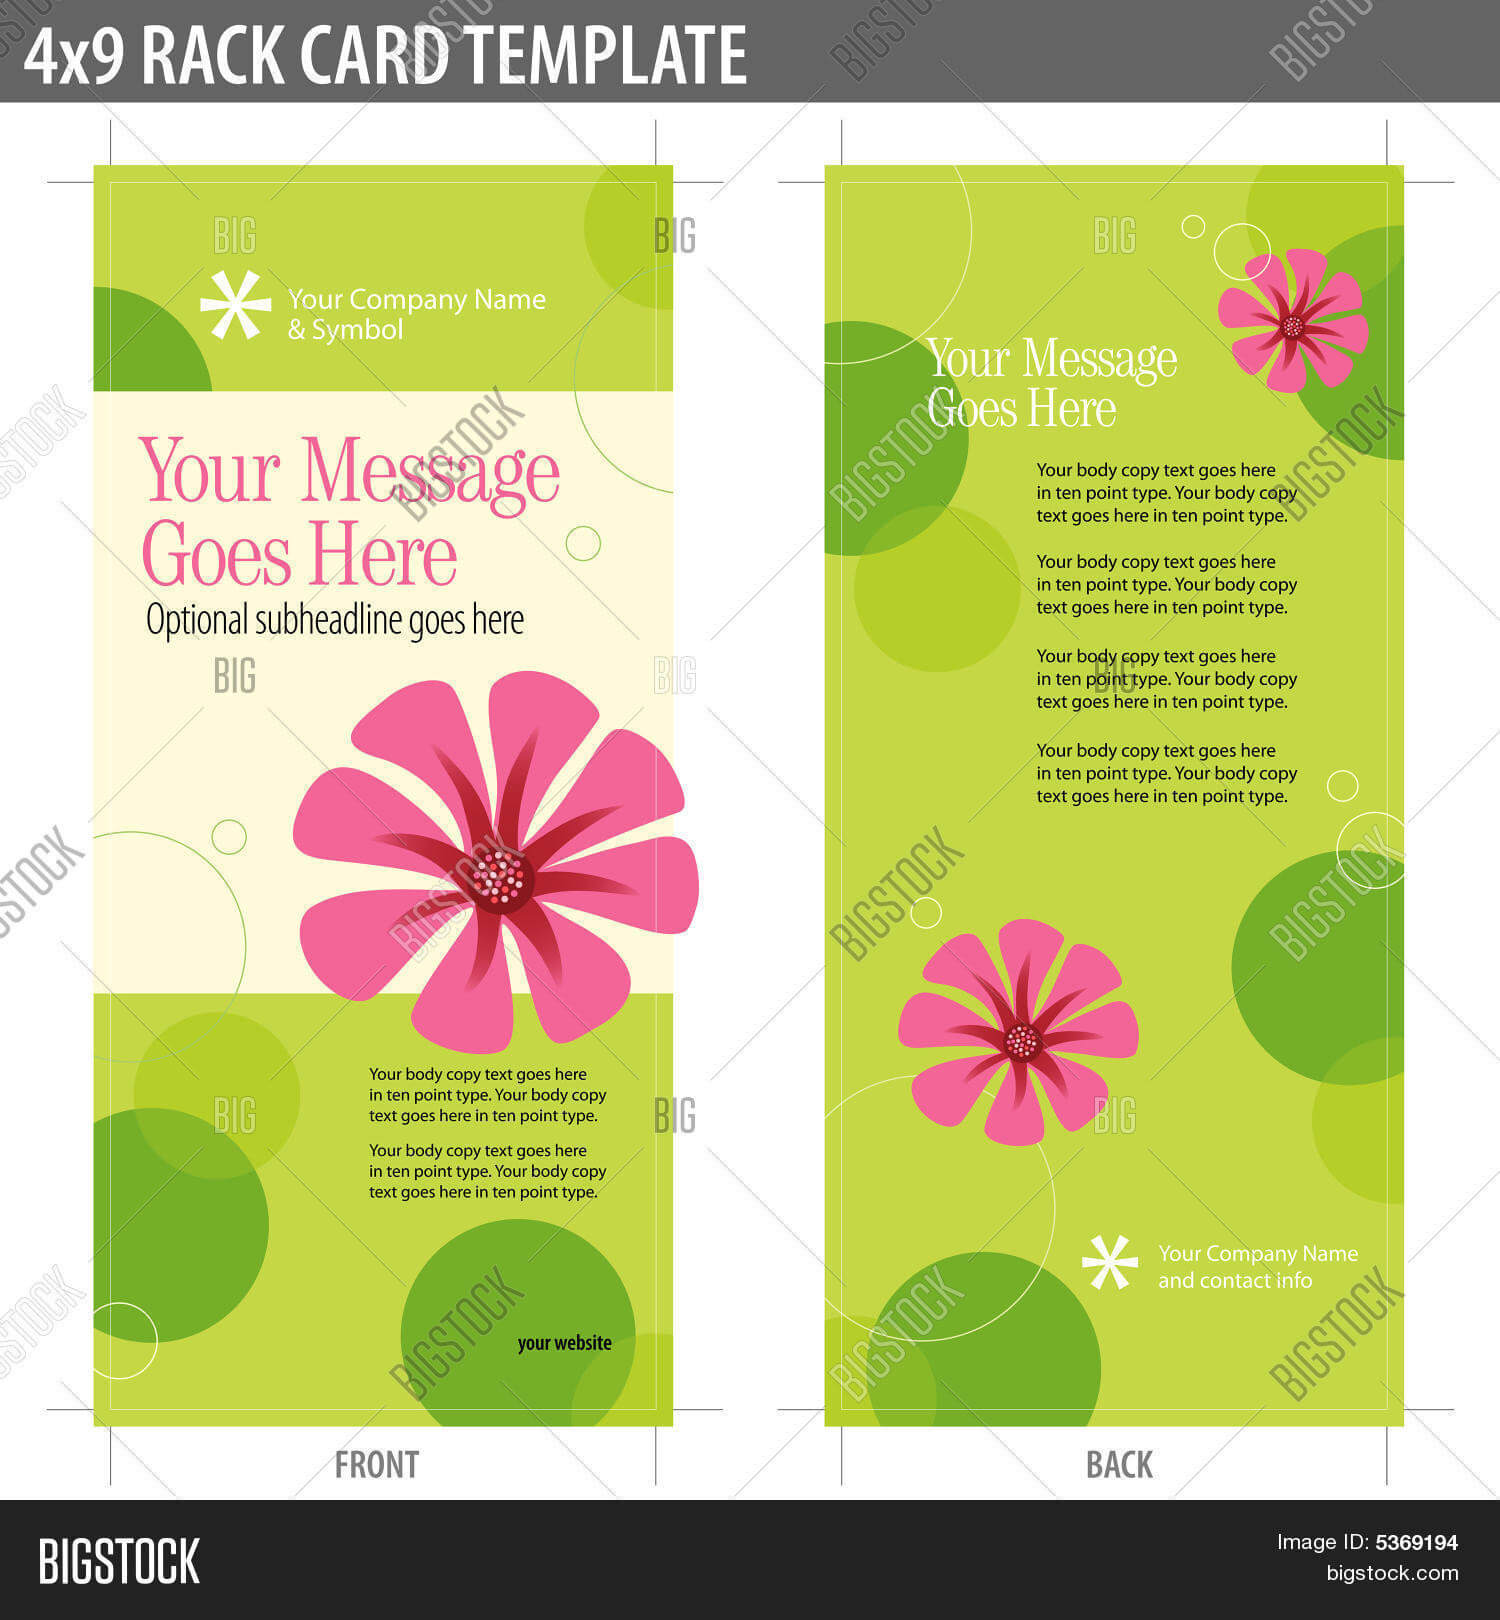 Cool Free Rack Card Template Indesign – Www.szf.se With Regard To Free Rack Card Template Word